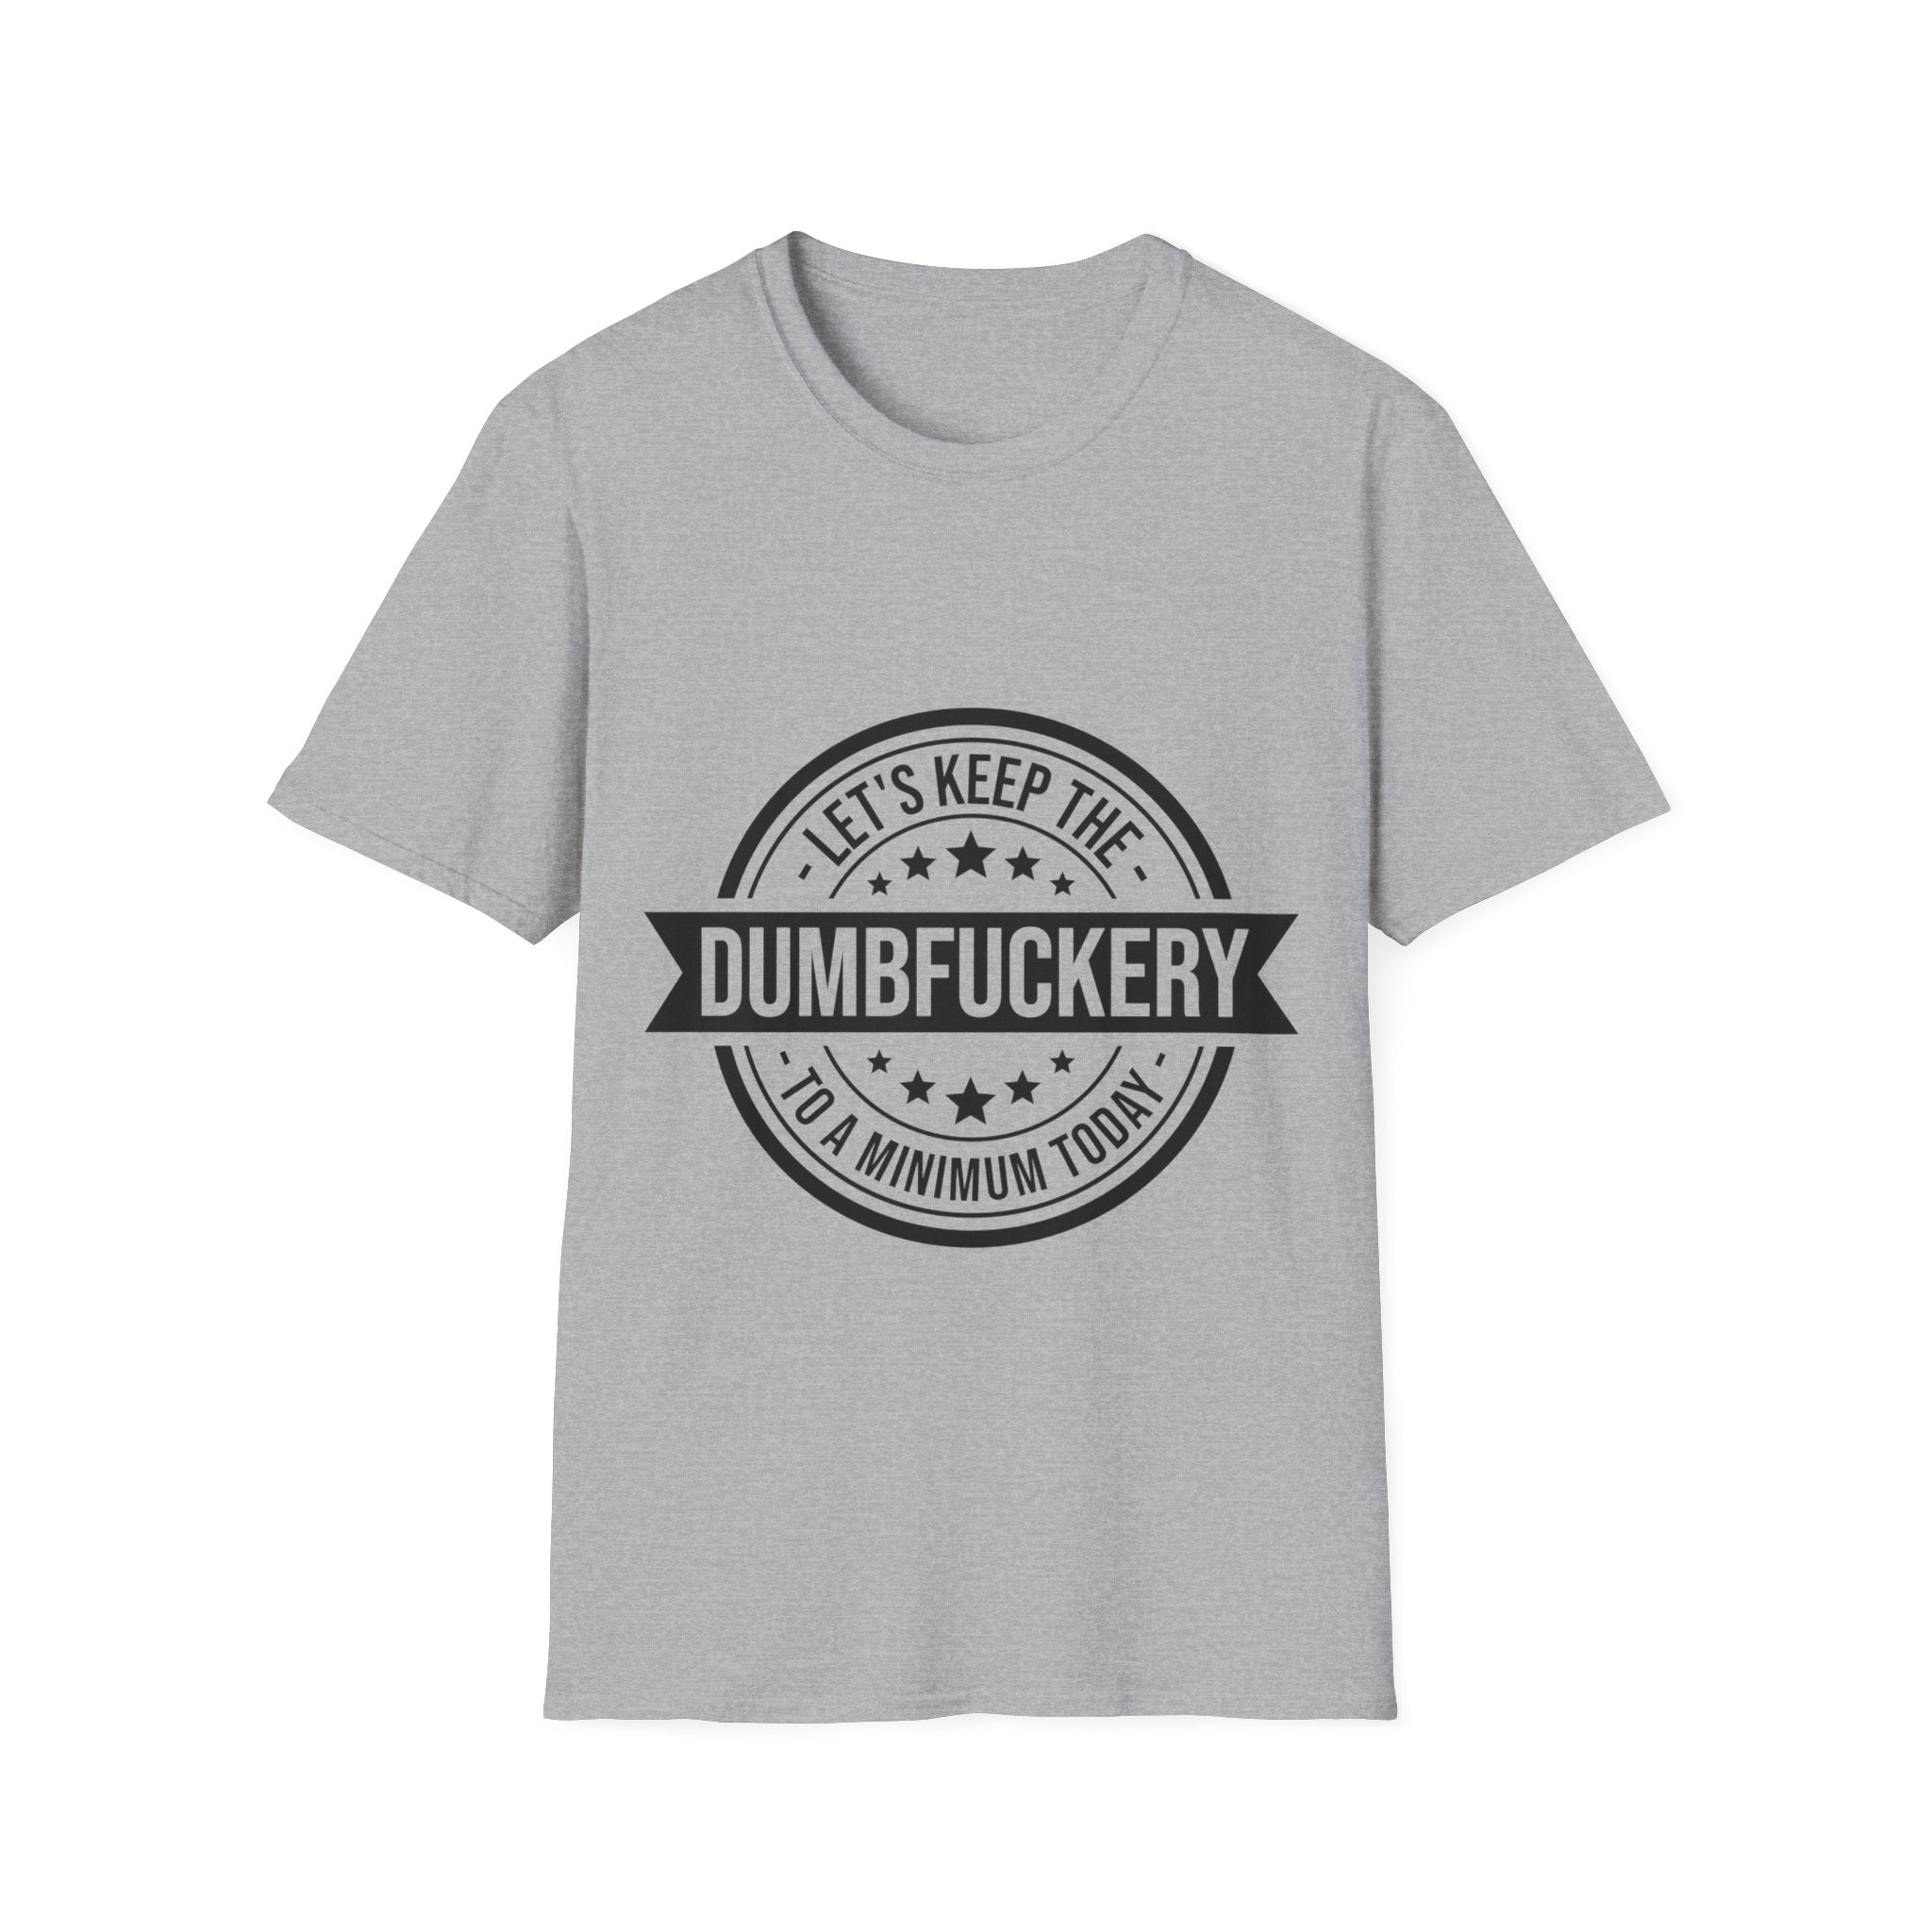 Let's Keep the Dumb Fuckery to a Minimum T-Shirt: Bold and Blunt!